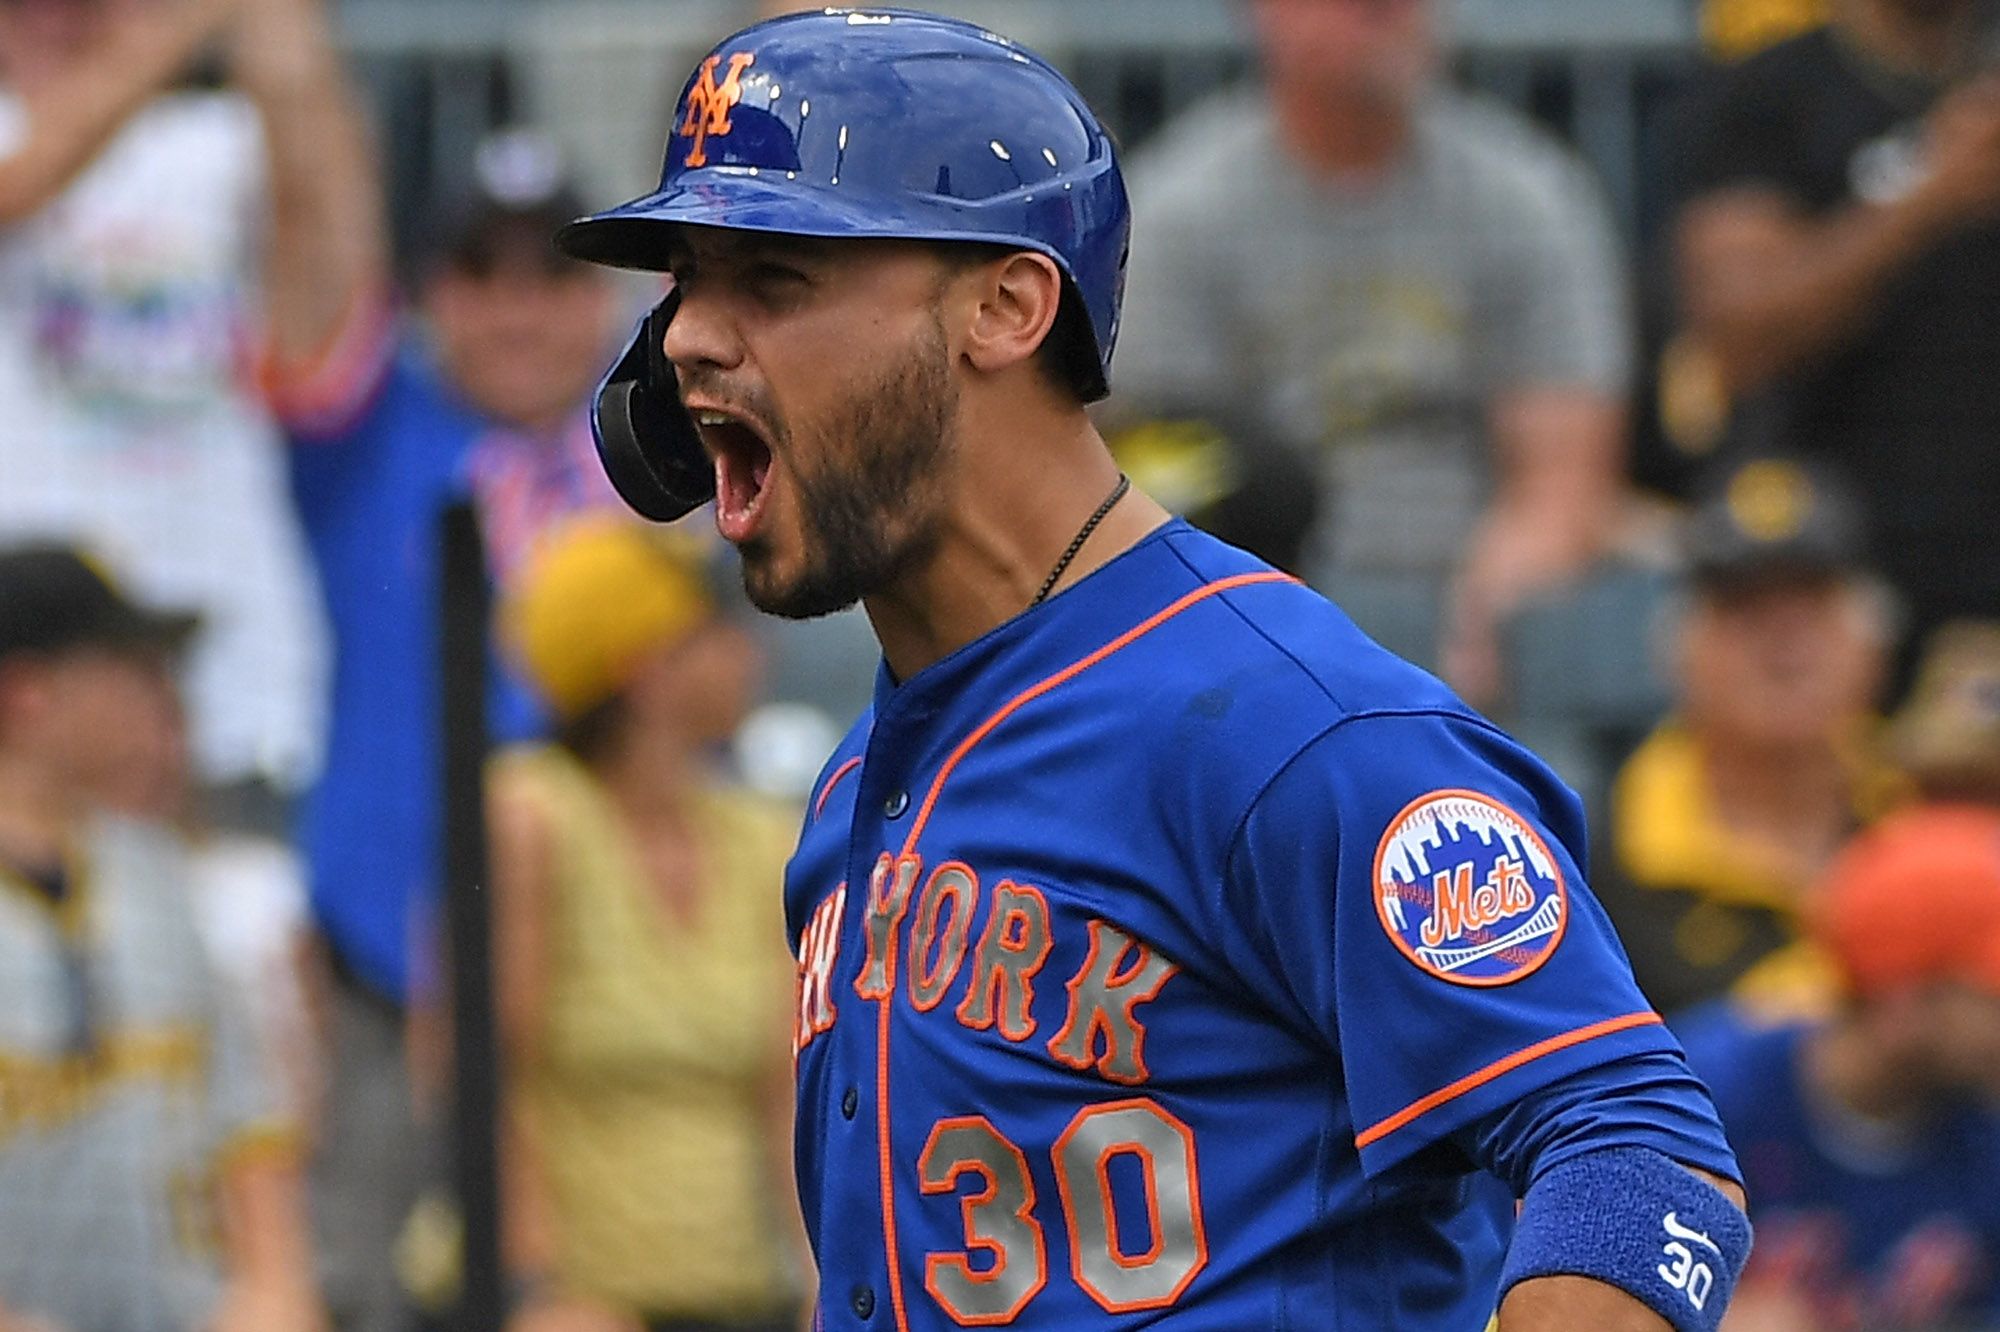 Michael Conforto celebrates during a New York Mets baseball game.